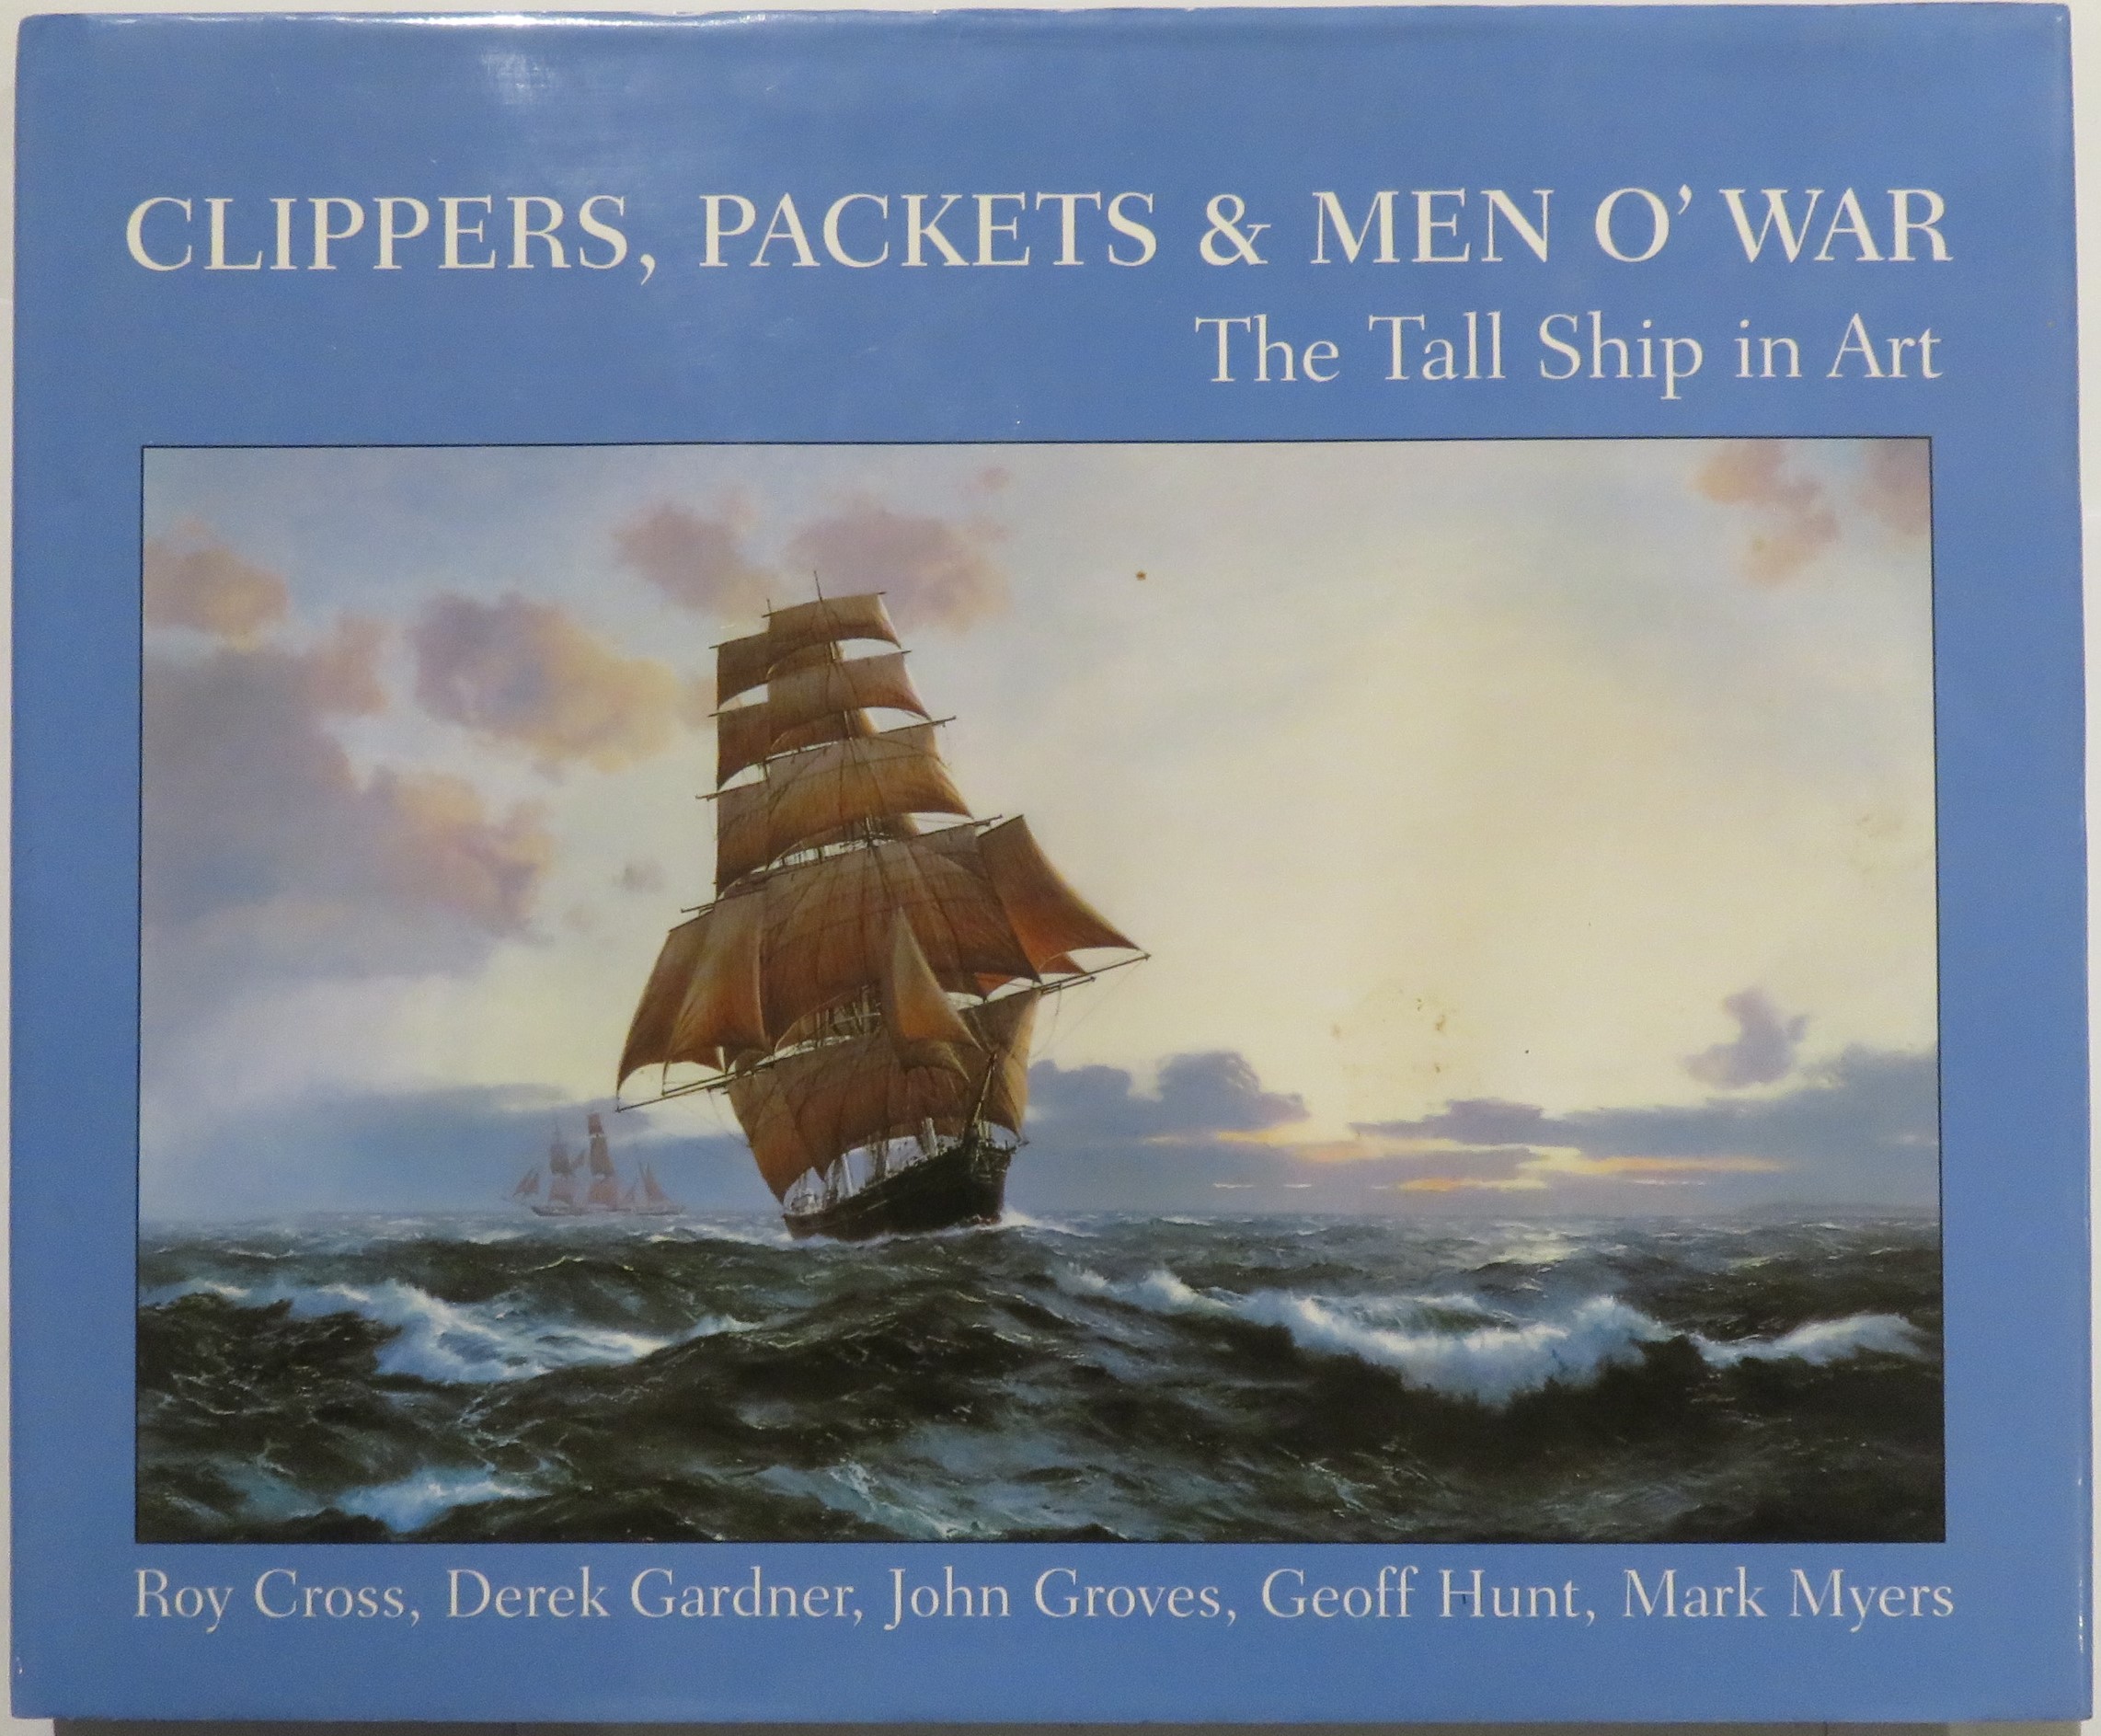 Clippers, Packets & Men O' War: The Tall Ship in Art